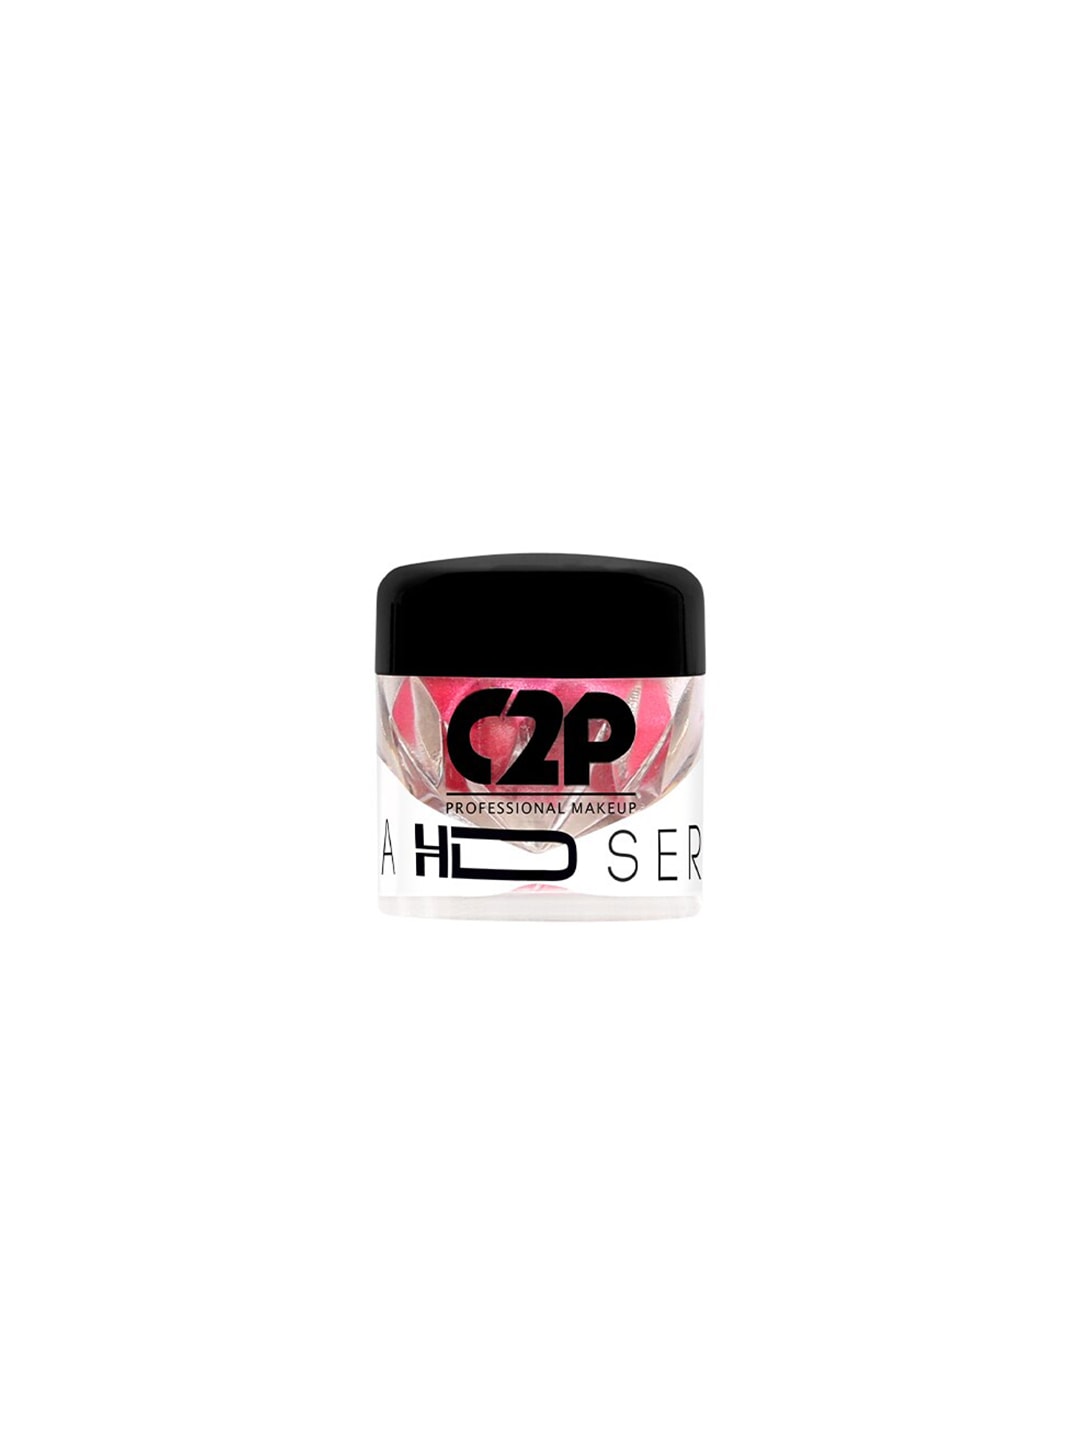 C2P PROFESSIONAL MAKEUP HD Loose Precious Pigments Eyeshadow - Honey Slope 330 Price in India